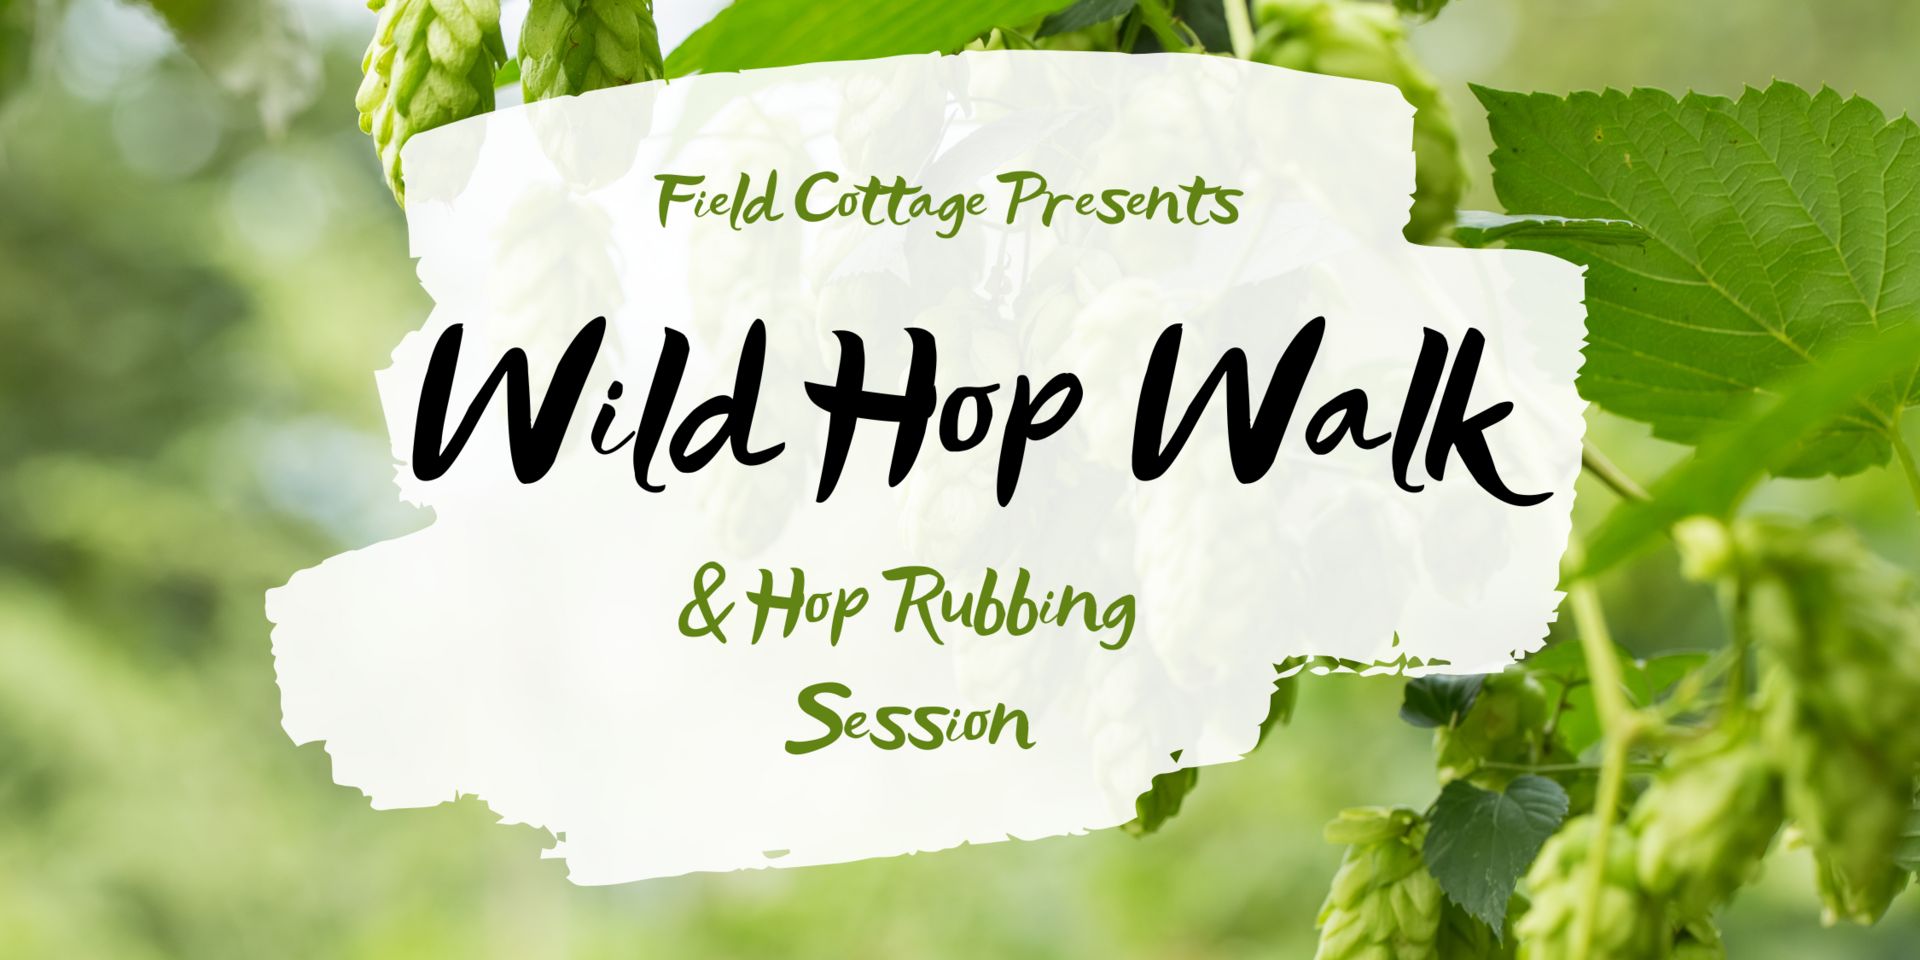 Wild Hop Walk and Hop Rubbing Session, Peterstow, England, United Kingdom